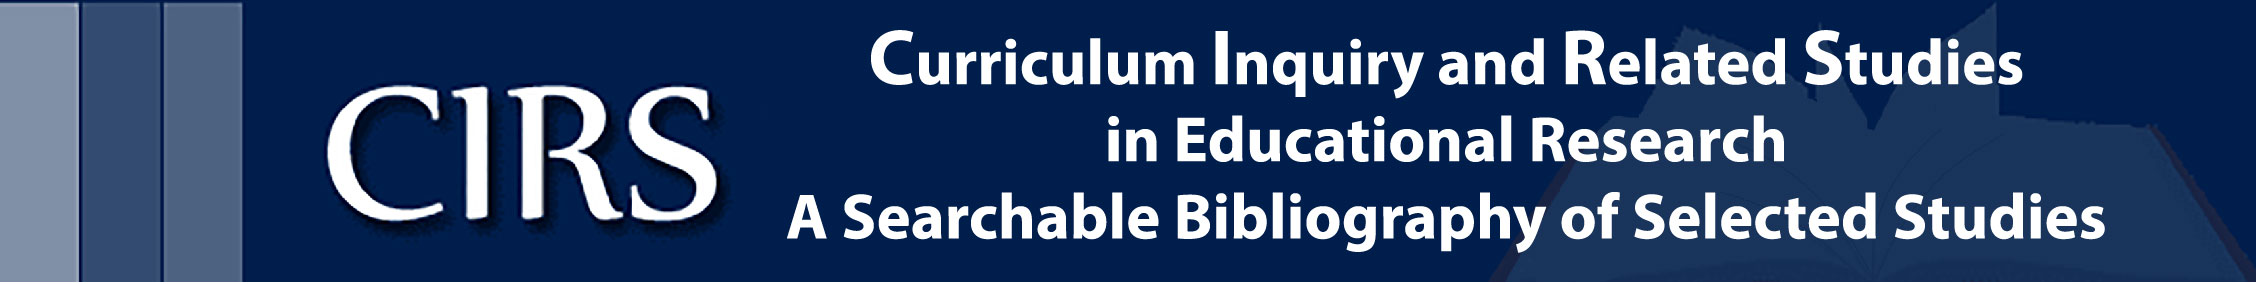 Narrow Topic - Value Assumptions and Ideologies in Curriculum